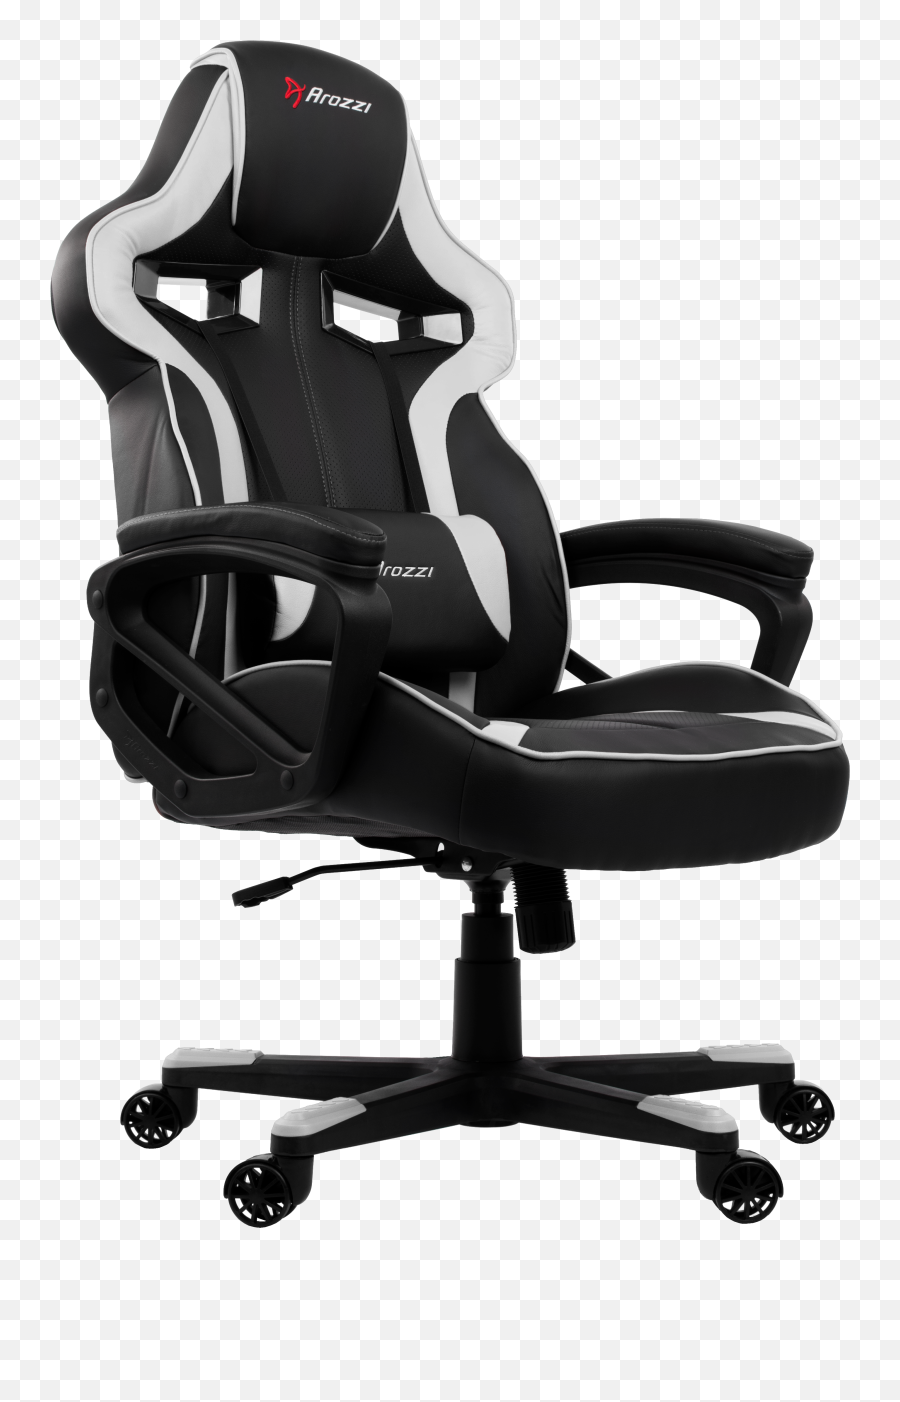 gt omega racing chair white